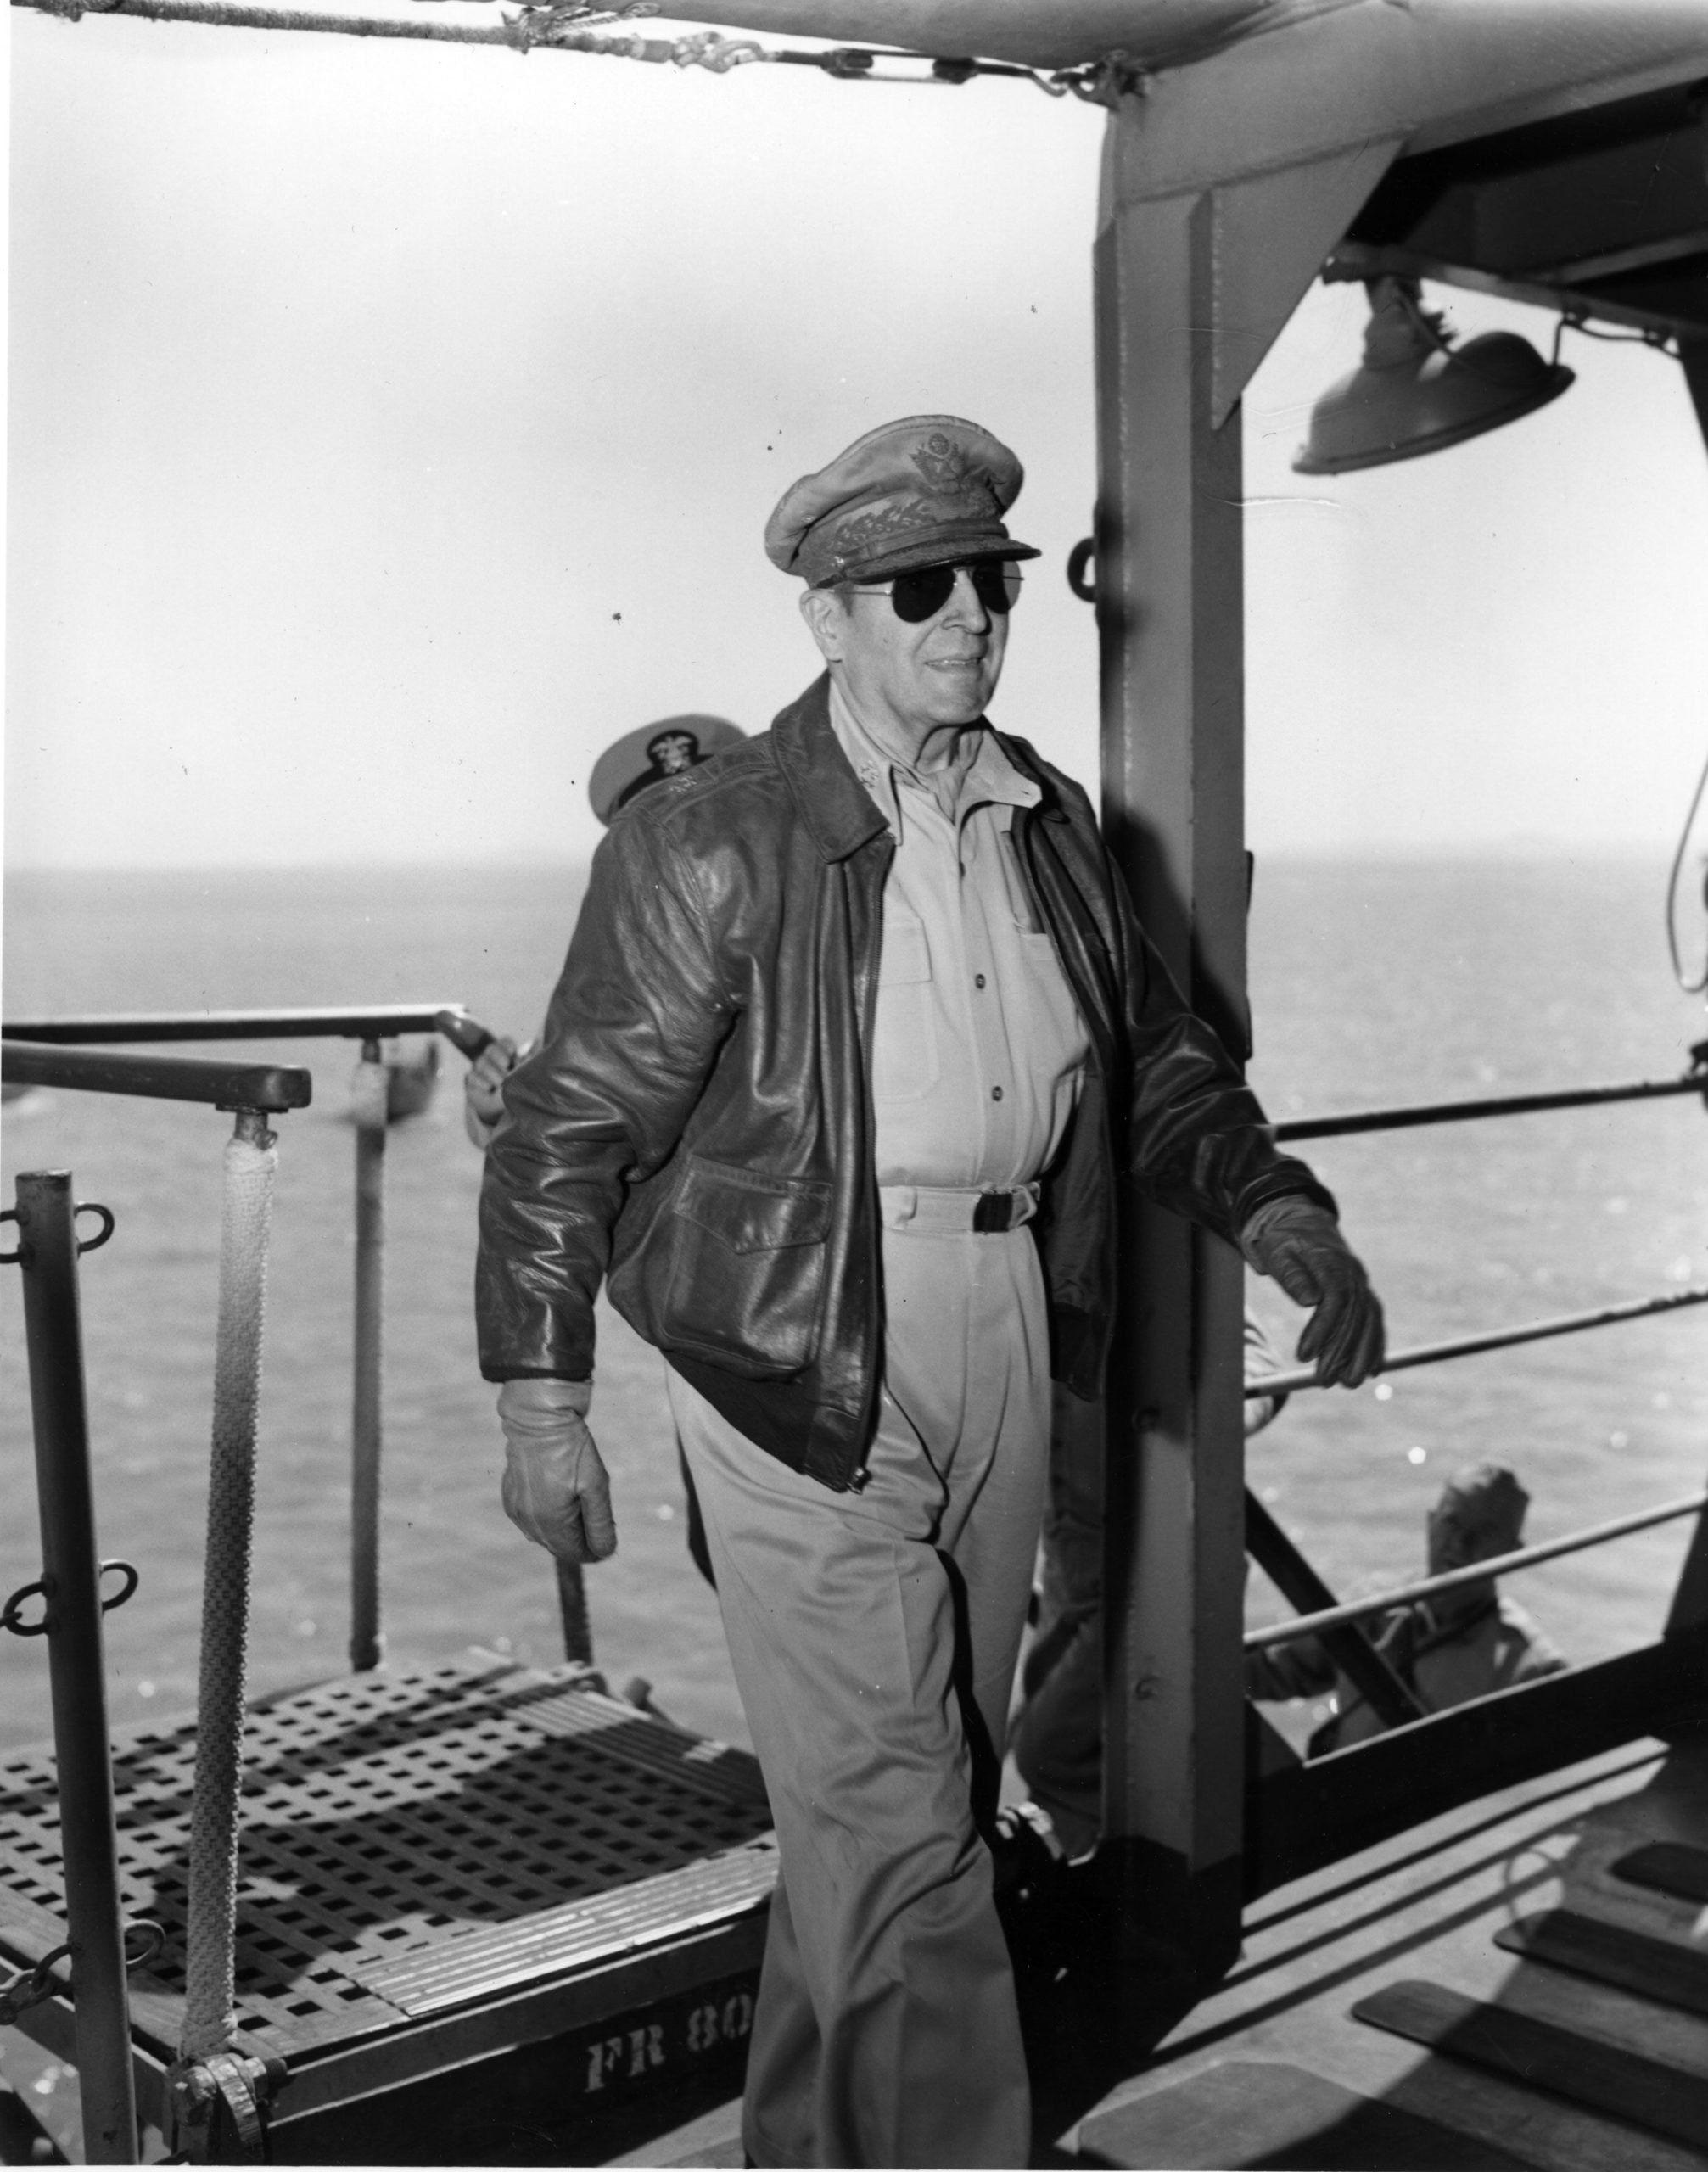 circa 1945:  American General Douglas MacArthur (1880 - 1964) on board ship.  (Photo by MPI/Getty Images)